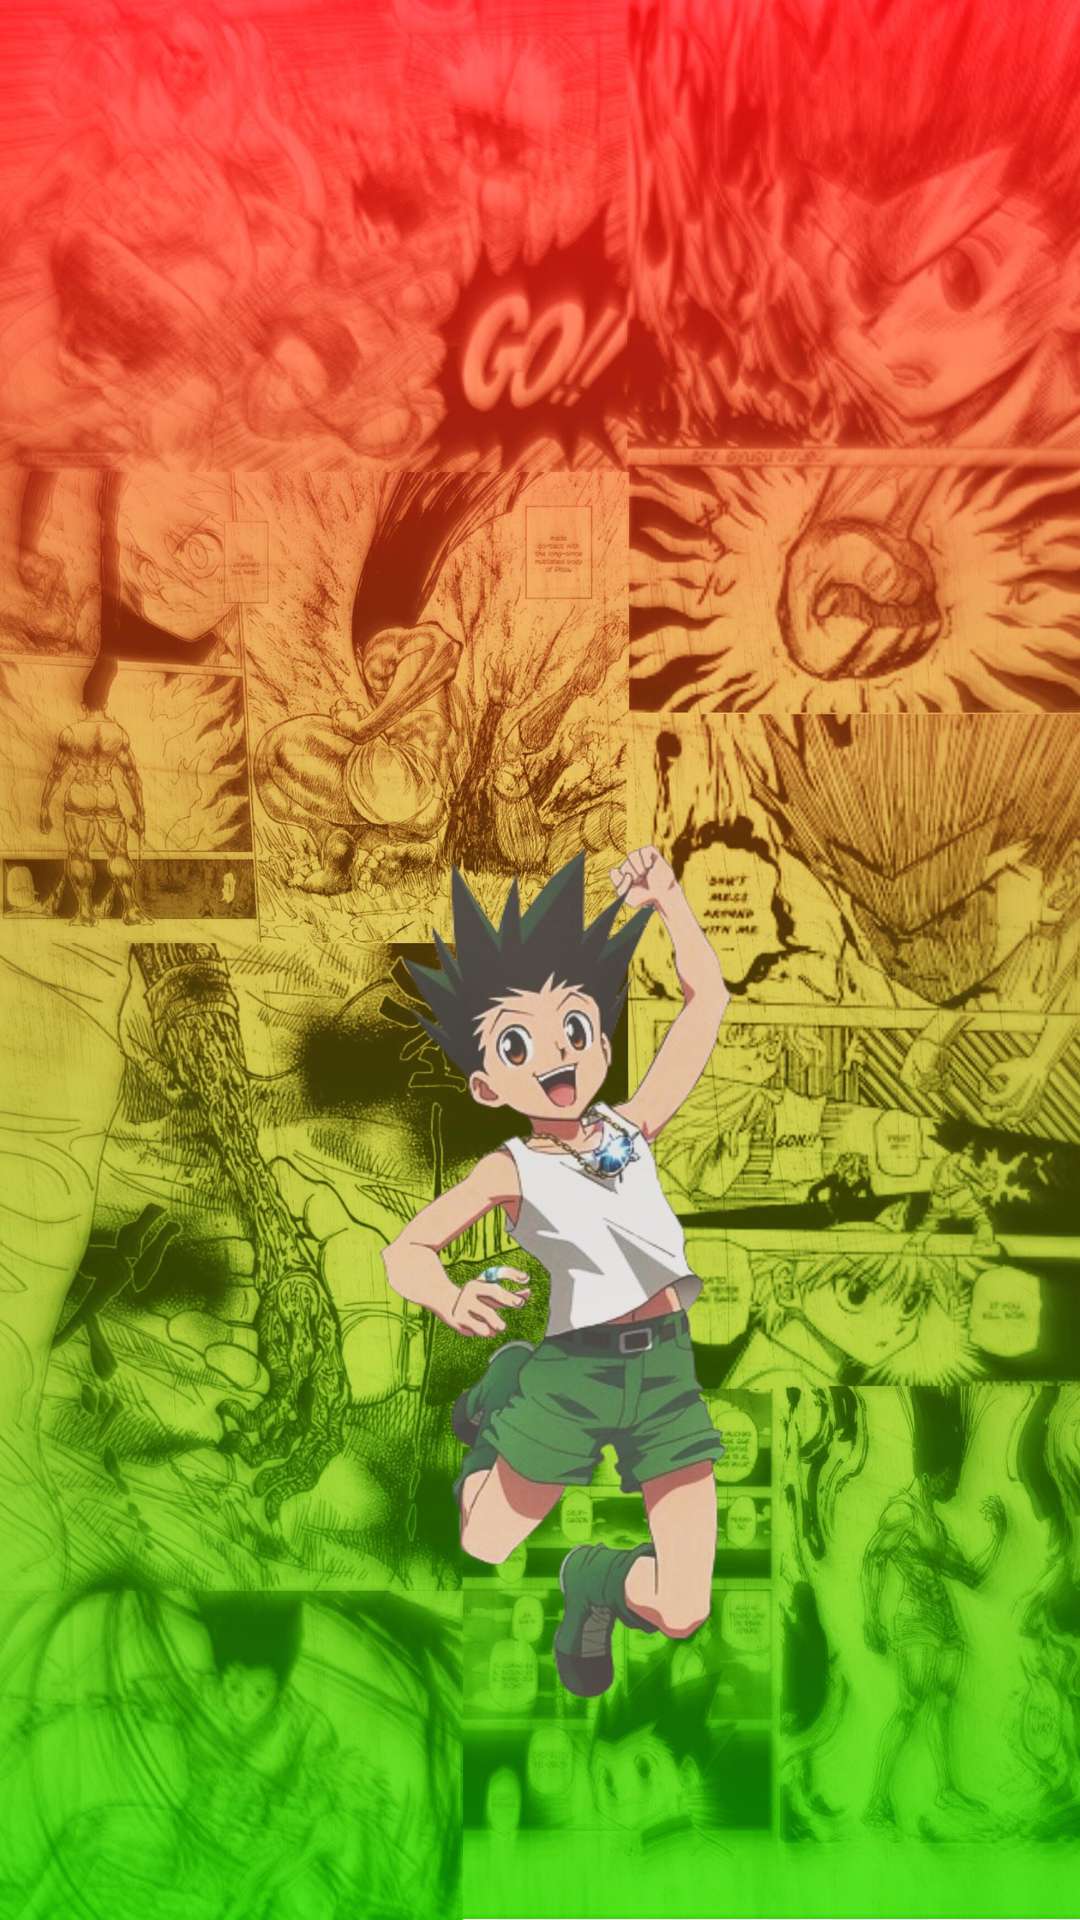 Gon Freecss Wallpapers